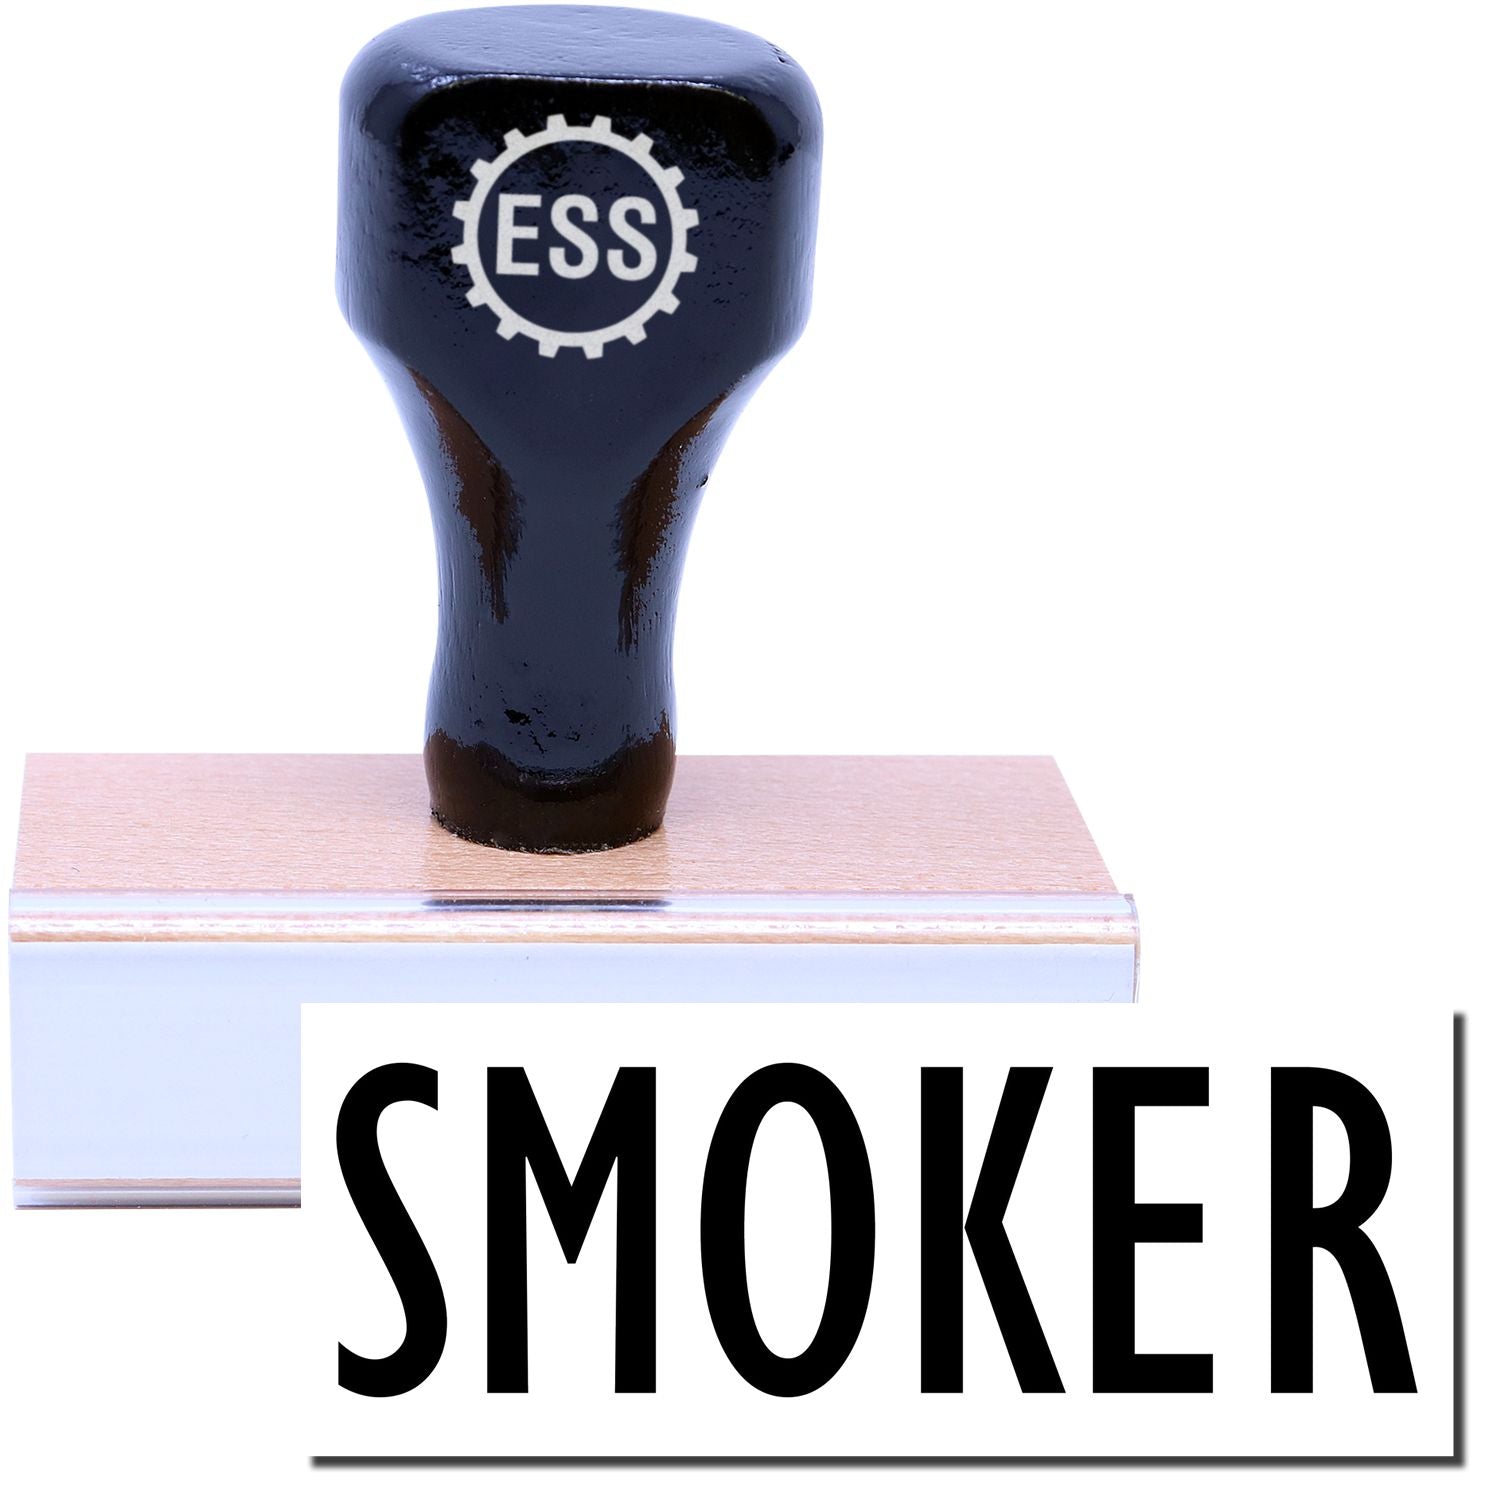 A stock office medical rubber stamp with a stamped image showing how the text "SMOKER" is displayed after stamping.